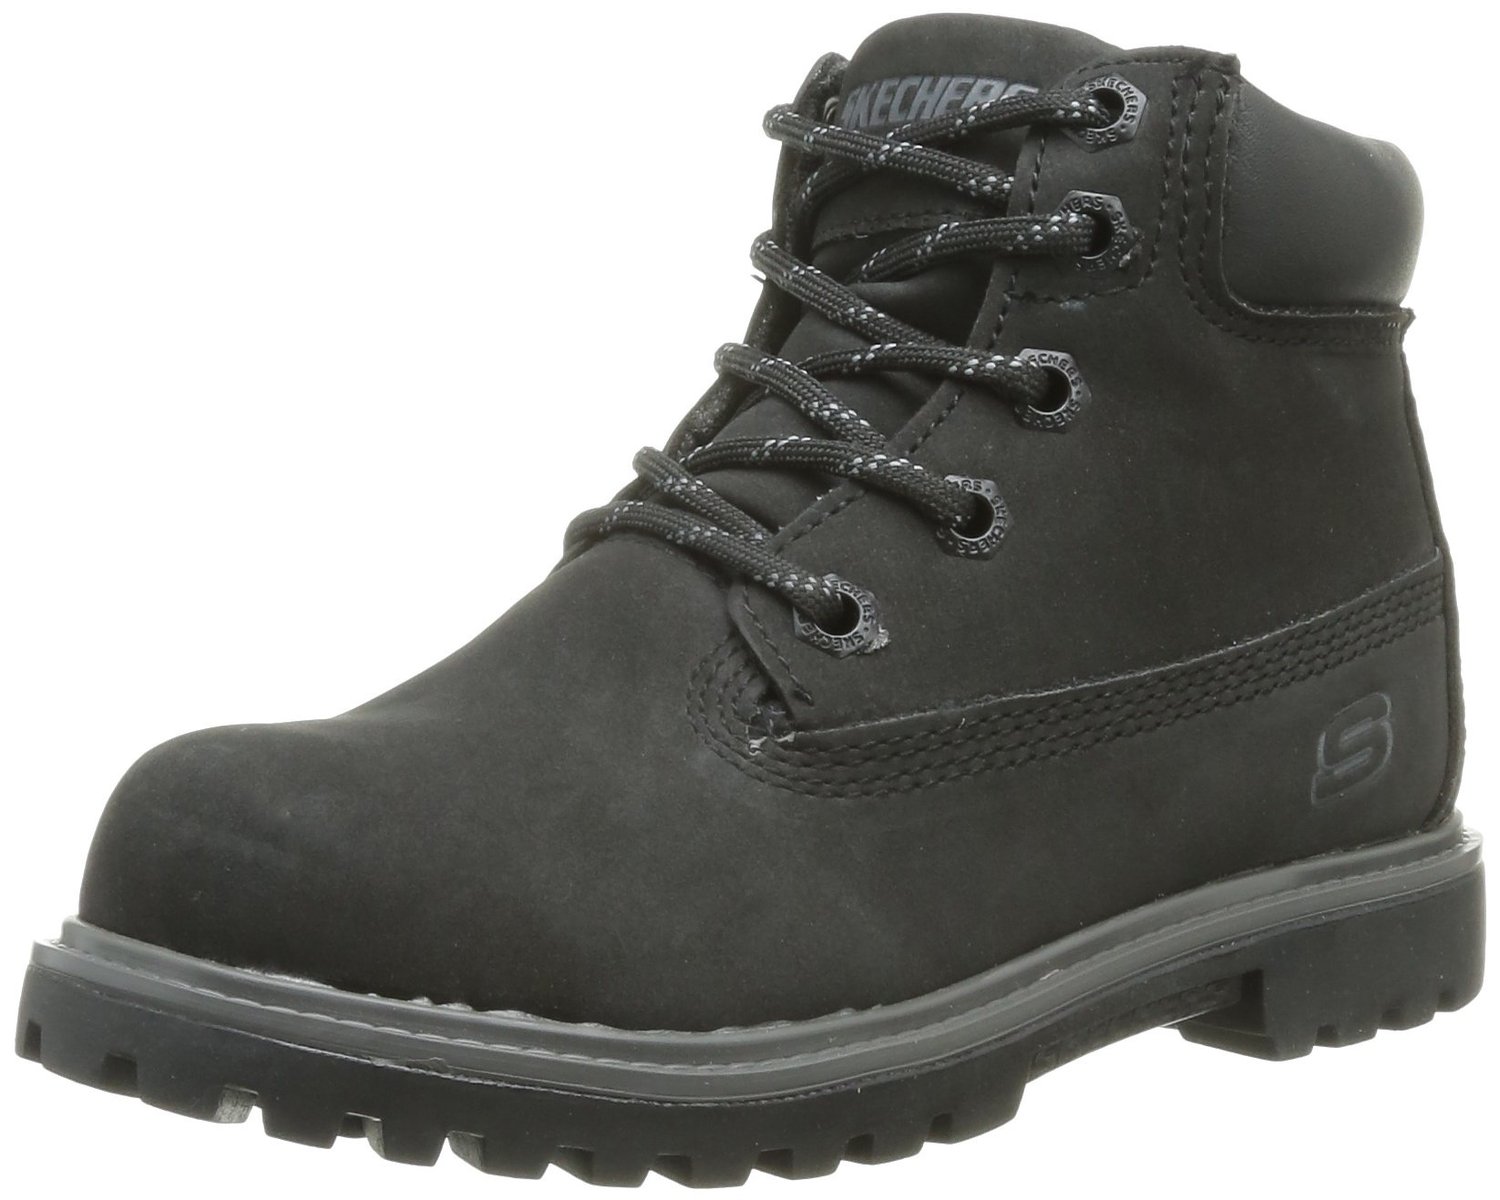 Skechers Kids Mecca Bunkhouse Classic Lace Boot